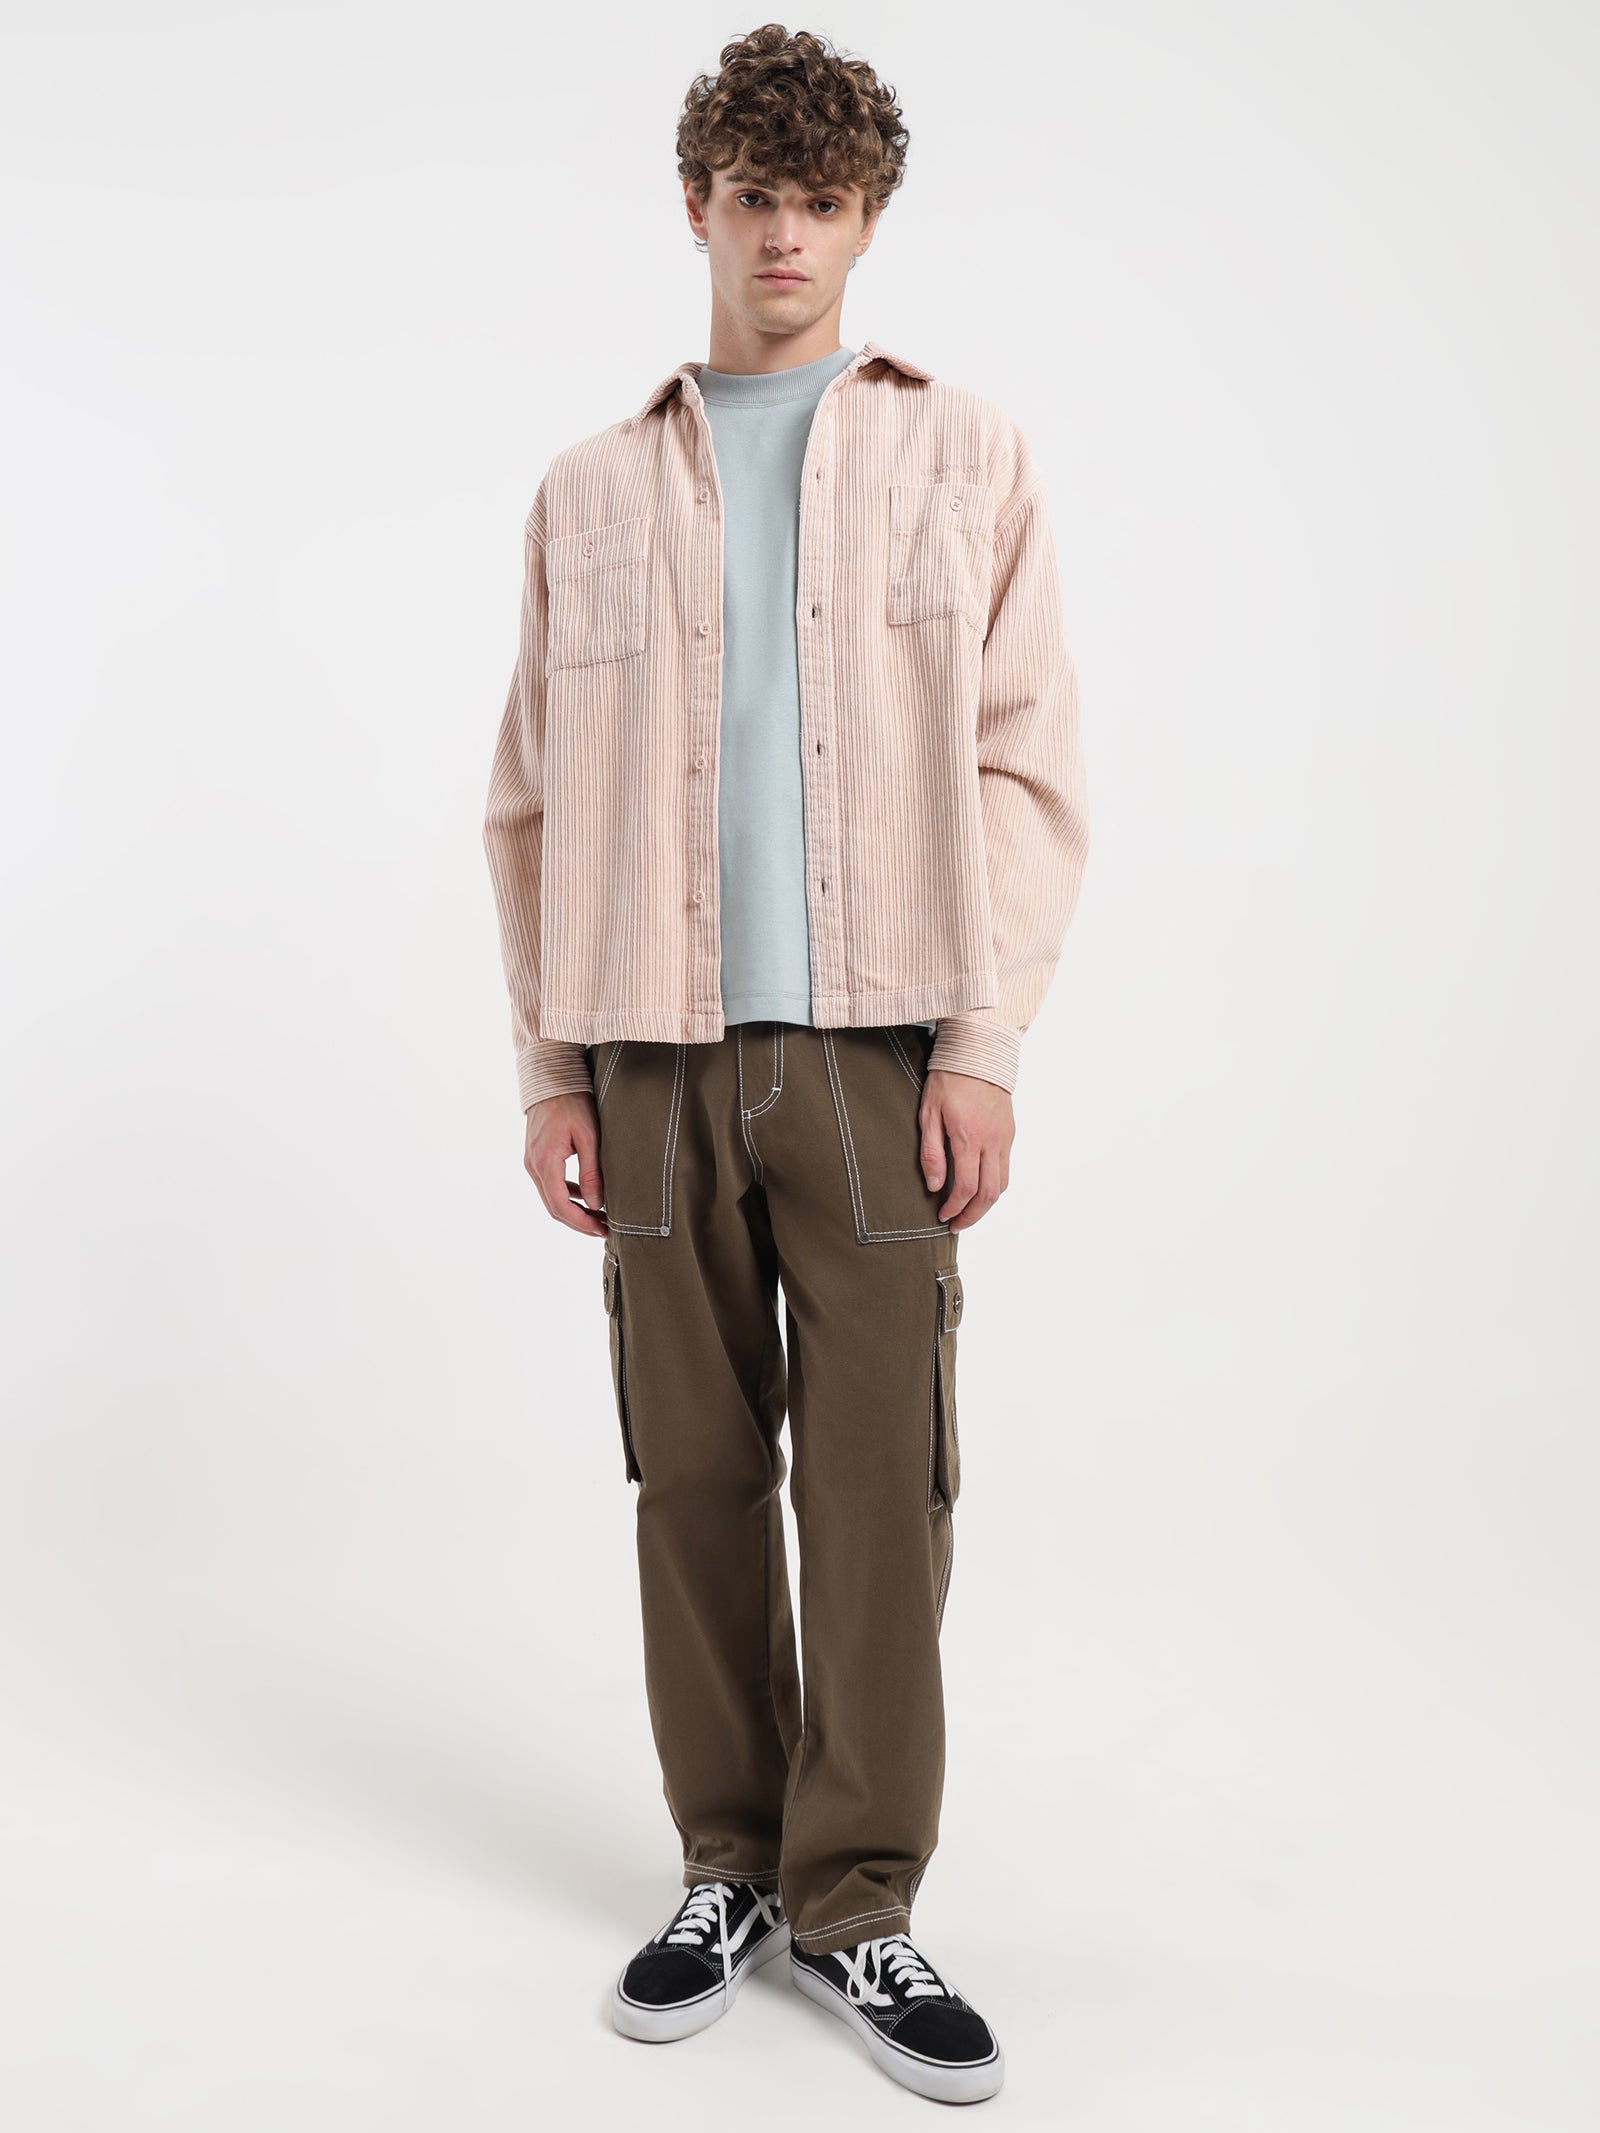 Manic Overshirt in Cosmetic Pink